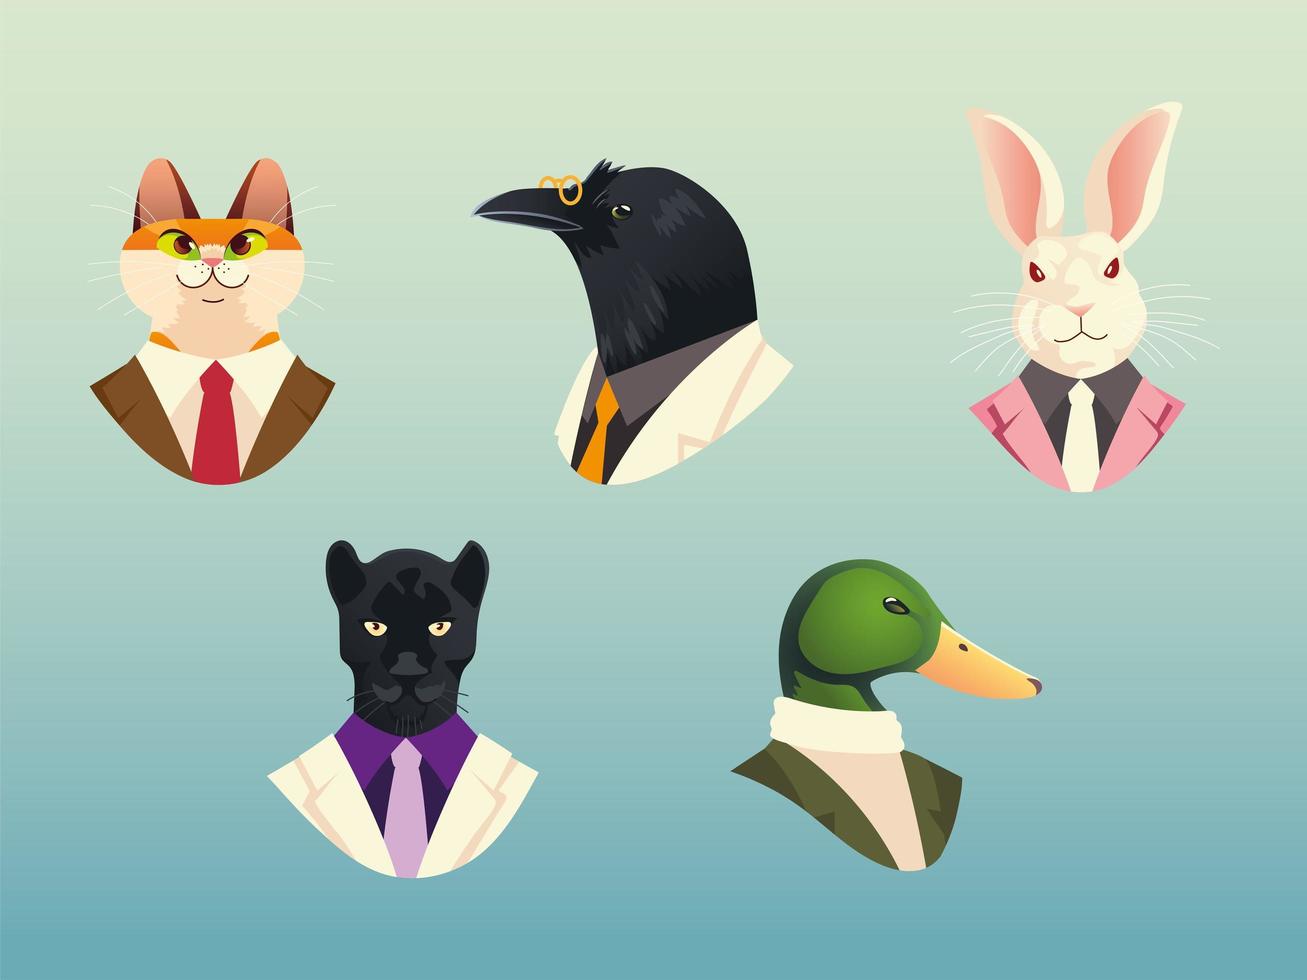 people art animals, cat crow duck panther and rabbit fashion hipster and vintage clothes vector